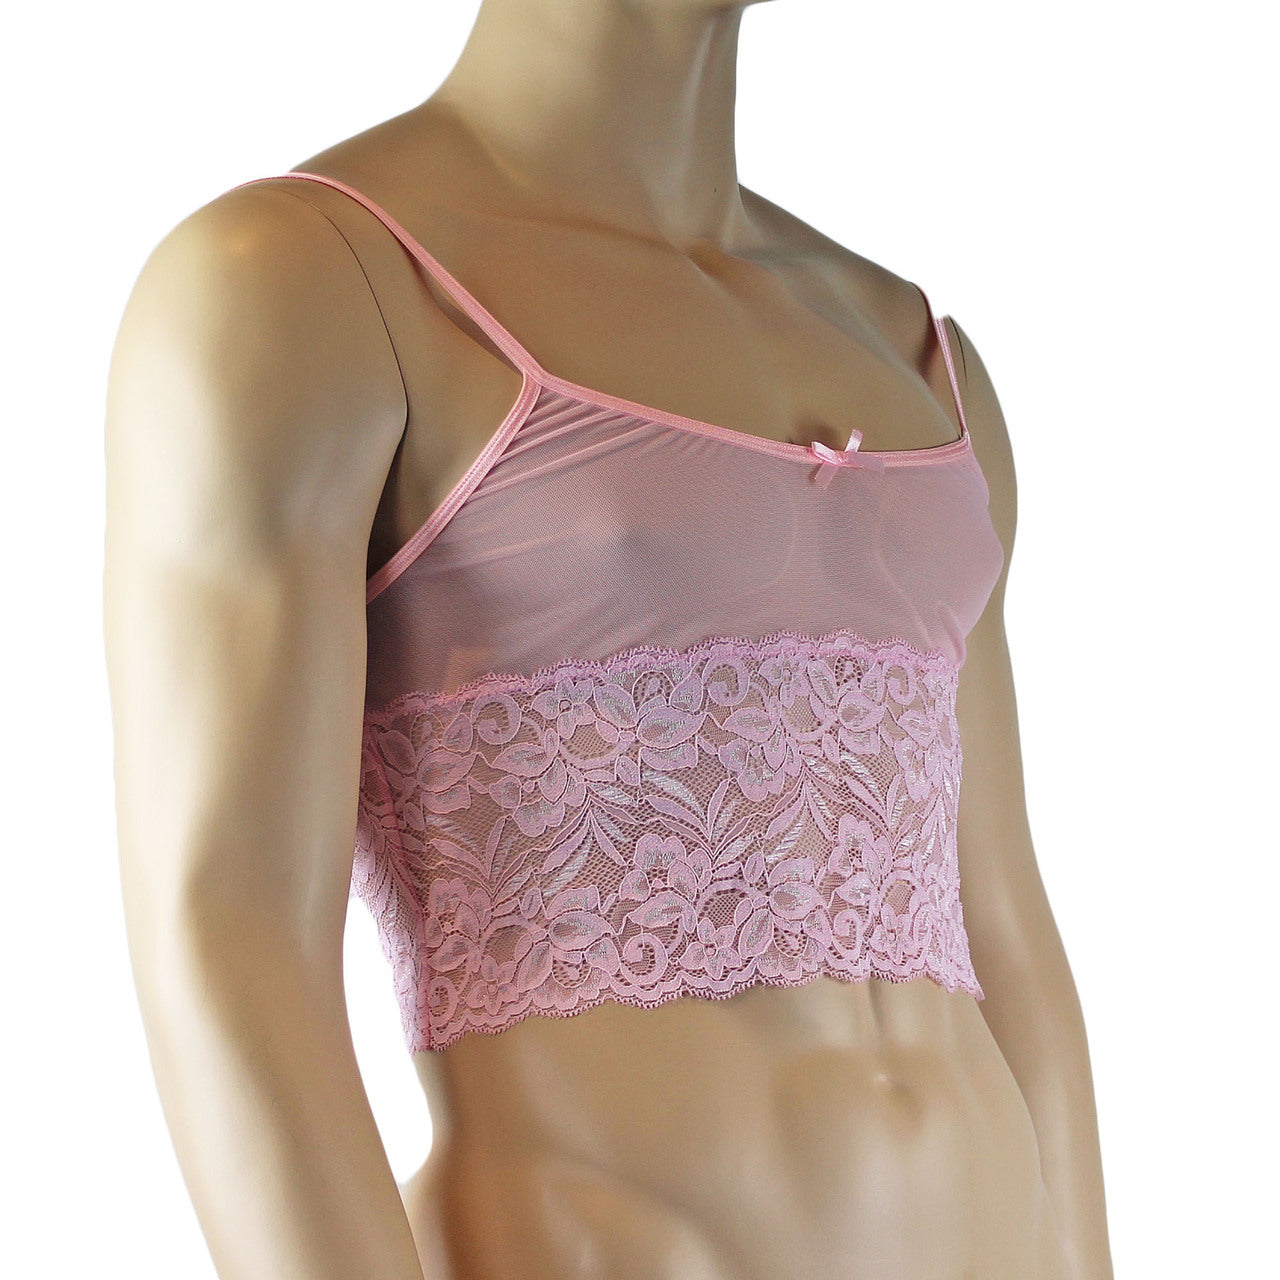 Mens Sexy Lace Camisole Top Male Lingerie (light pink plus other colours)